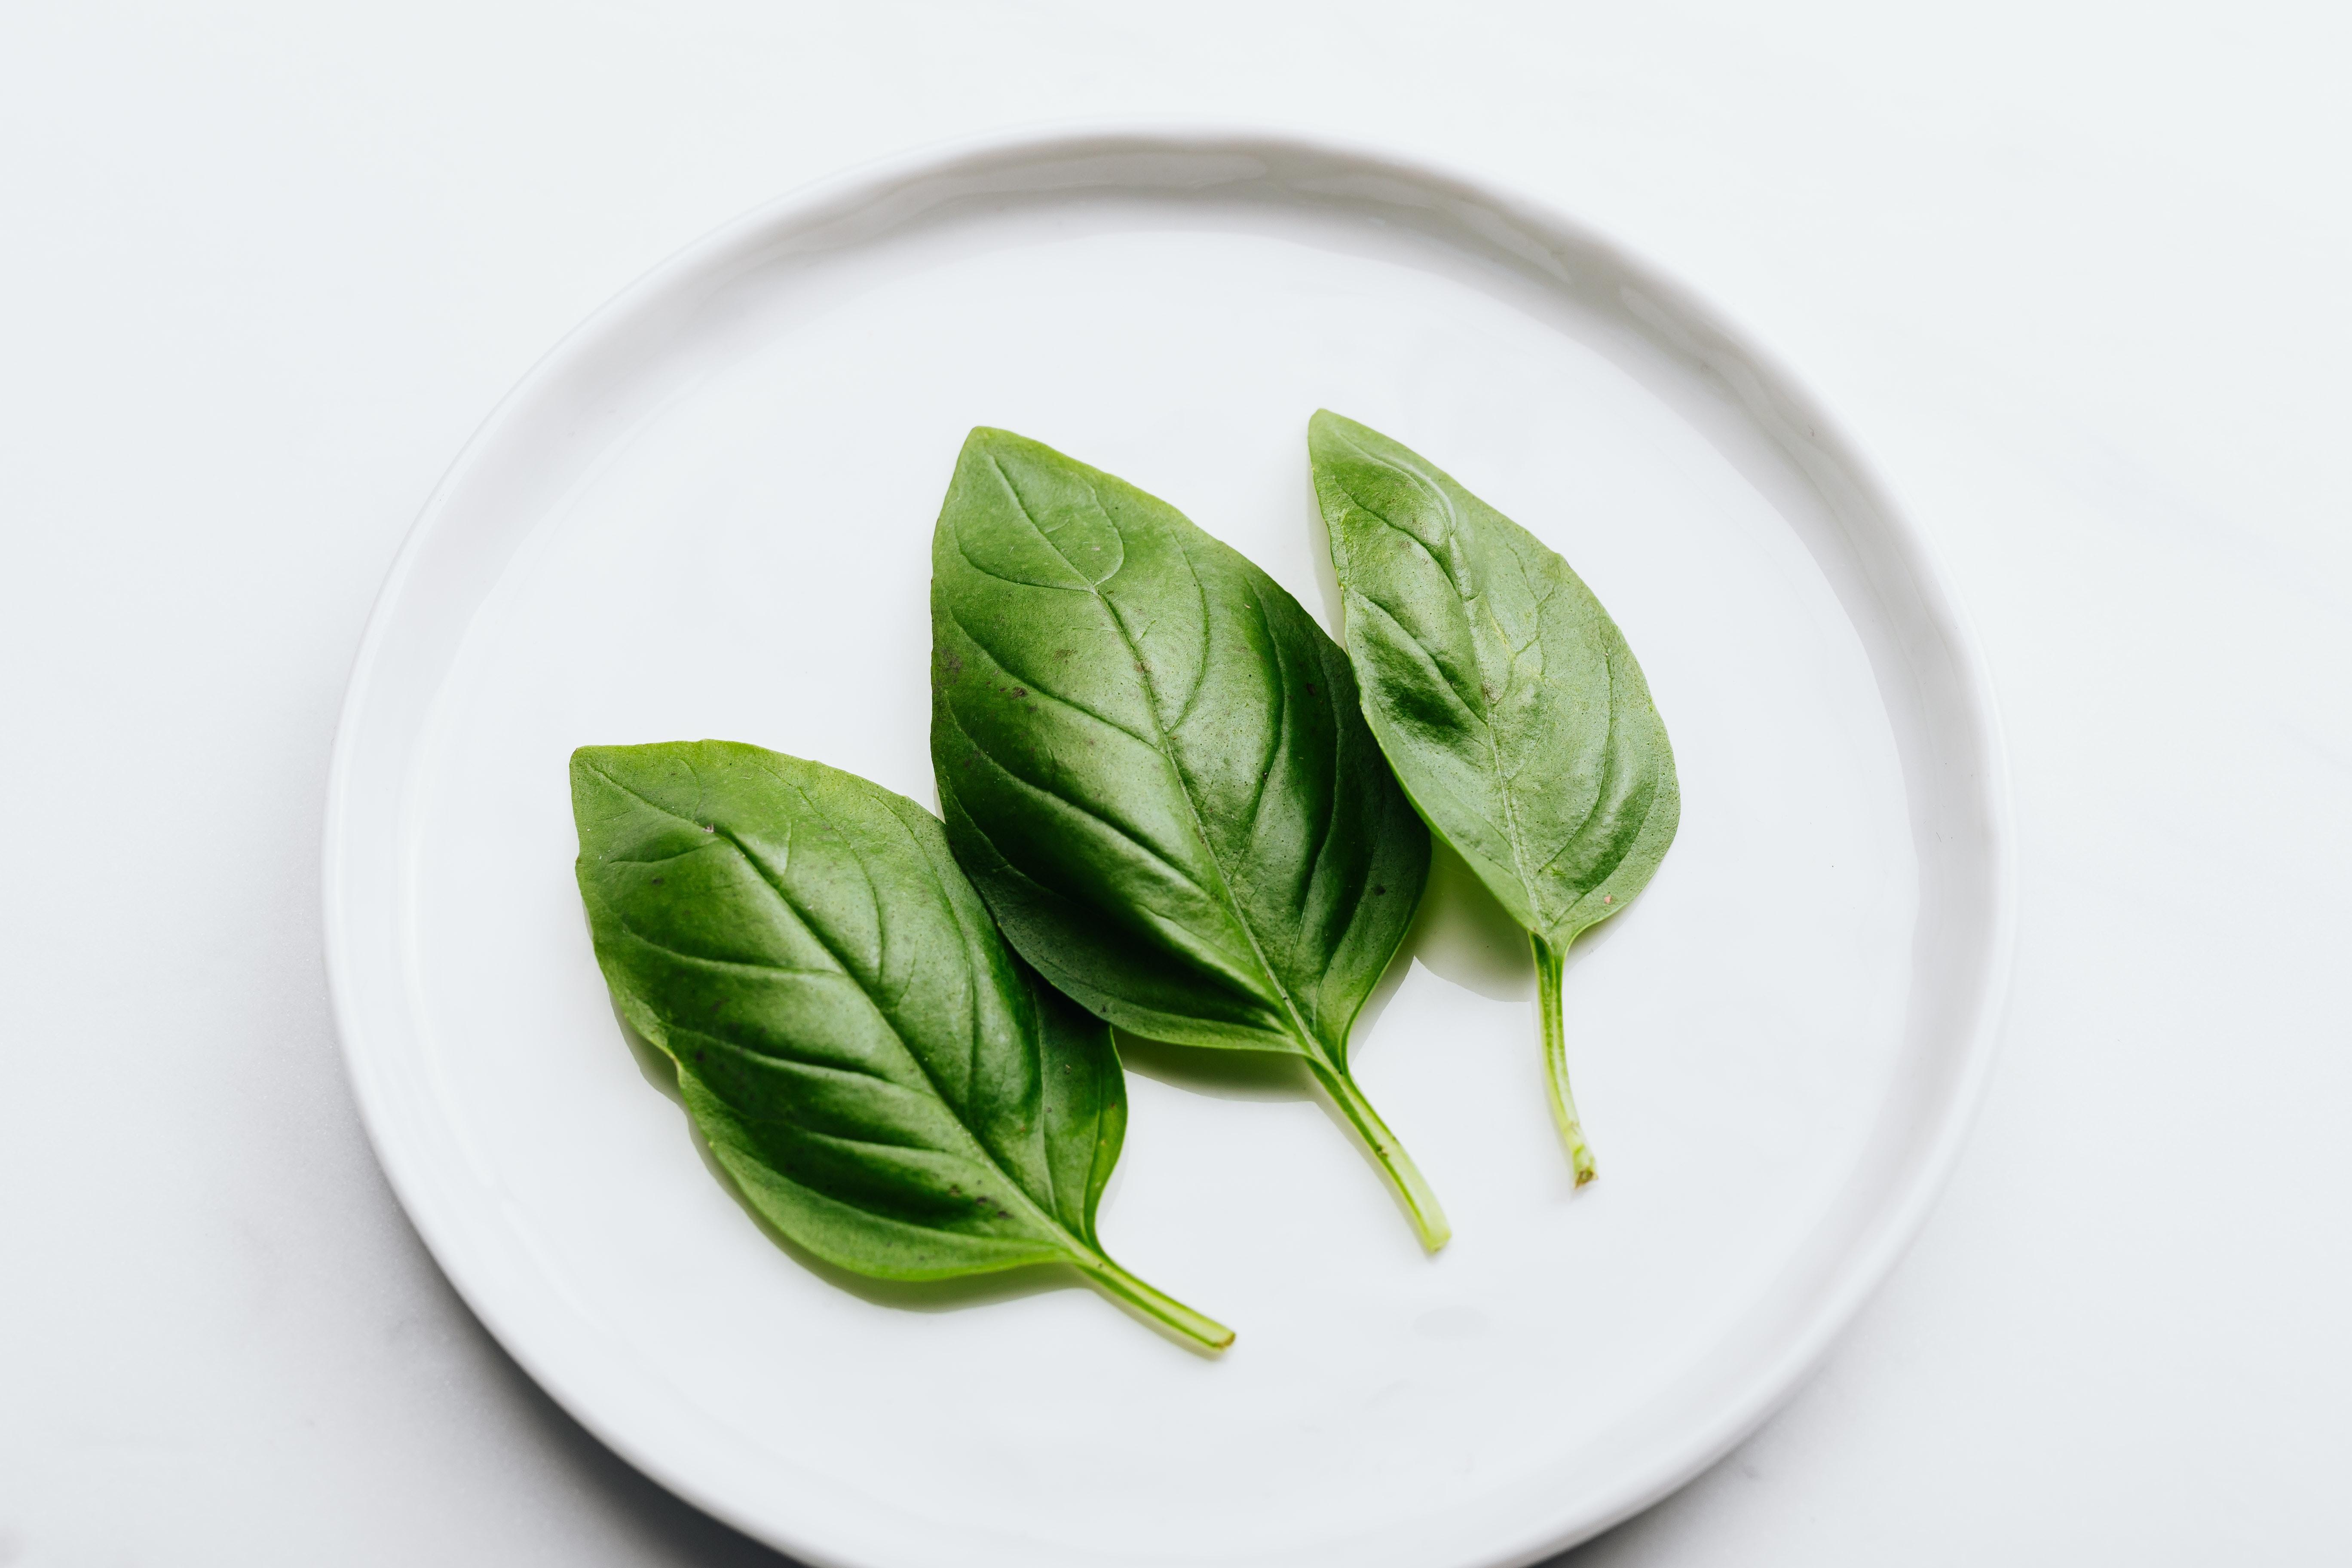 How many basil leaves make a tablespoon? 